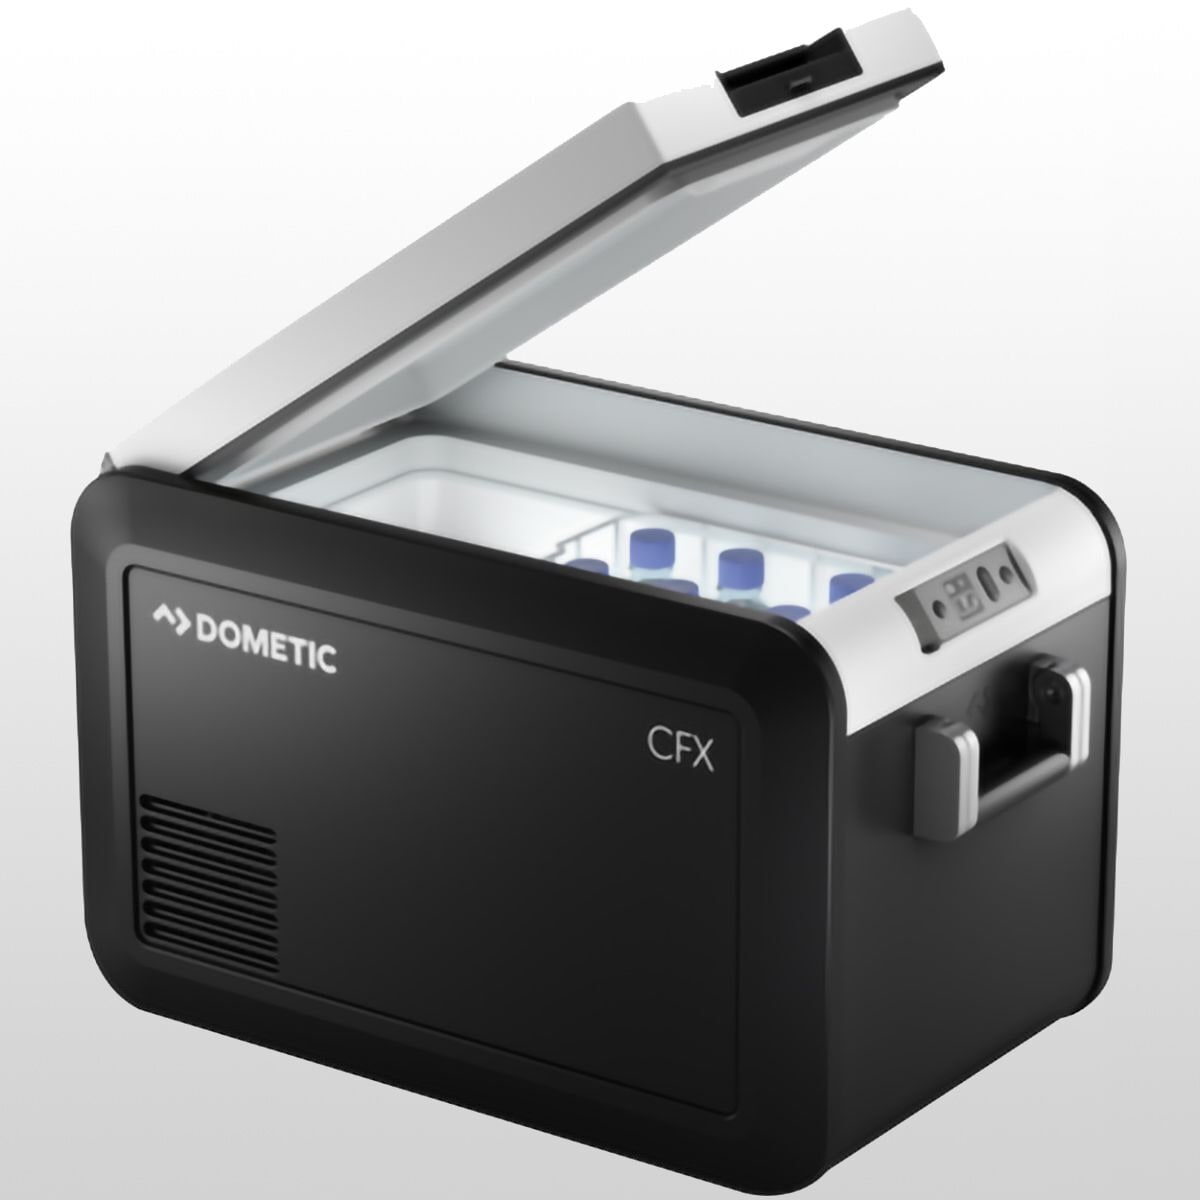  Dometic CFX3 35 Powered Cooler - Hike & Camp